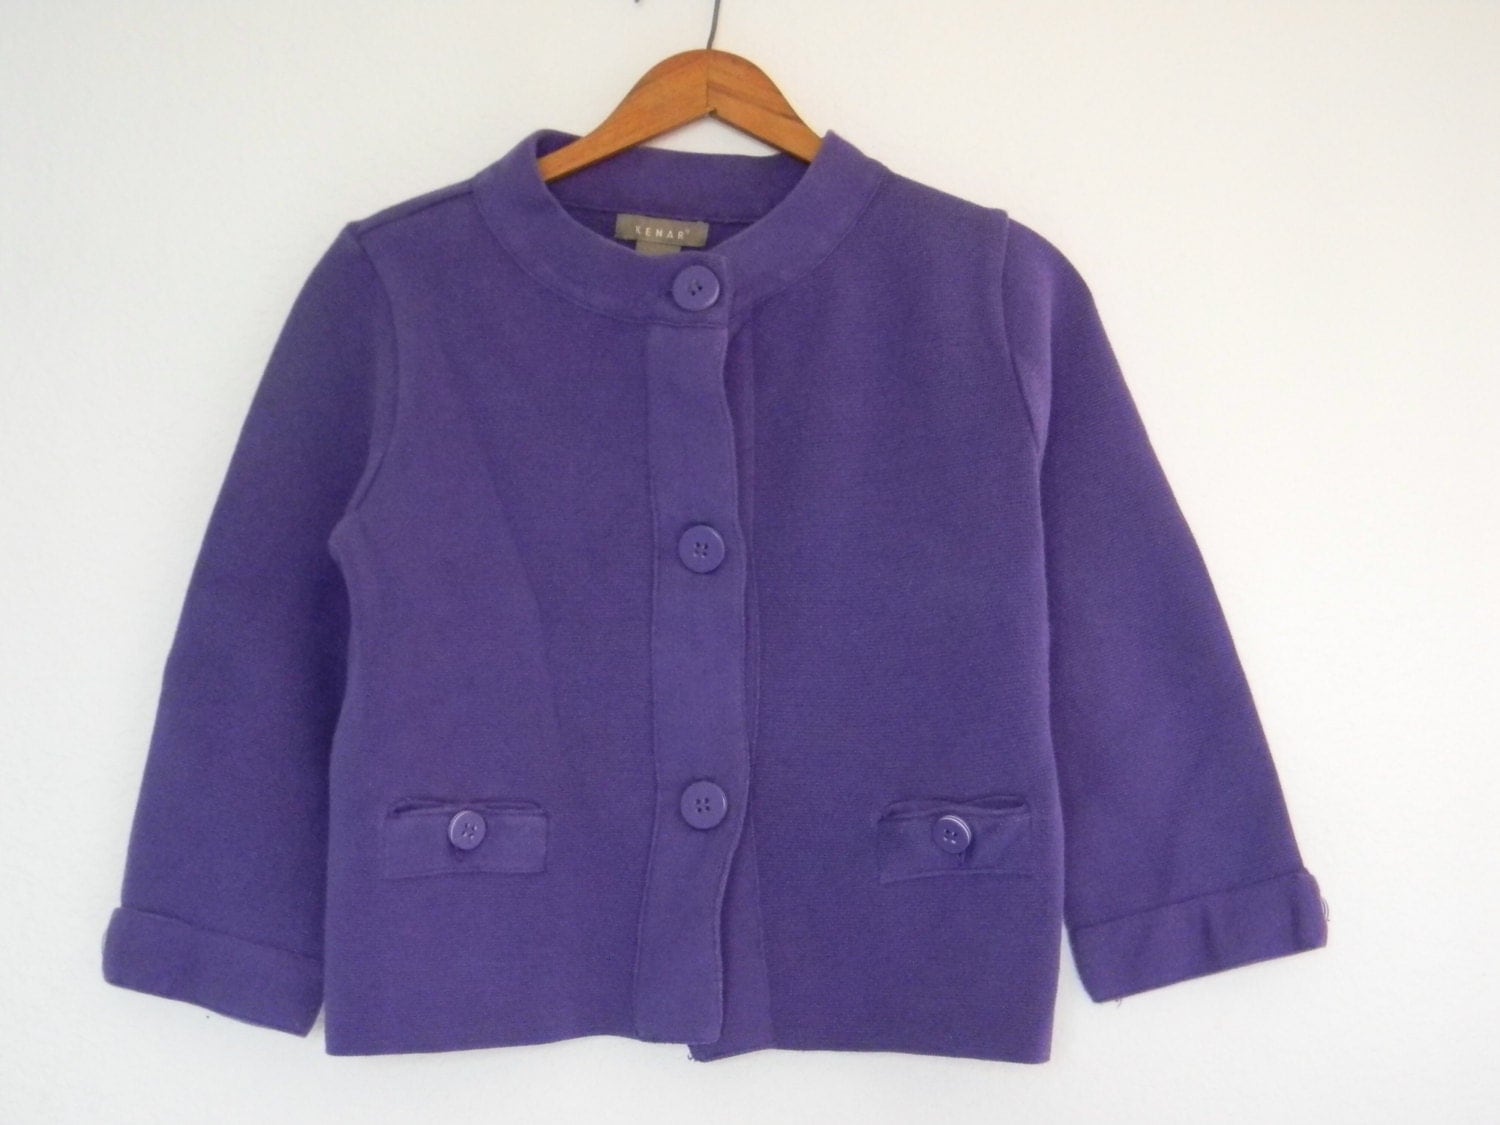 Vintage women's cropped purple cardigan long by MyPolyesterCloset